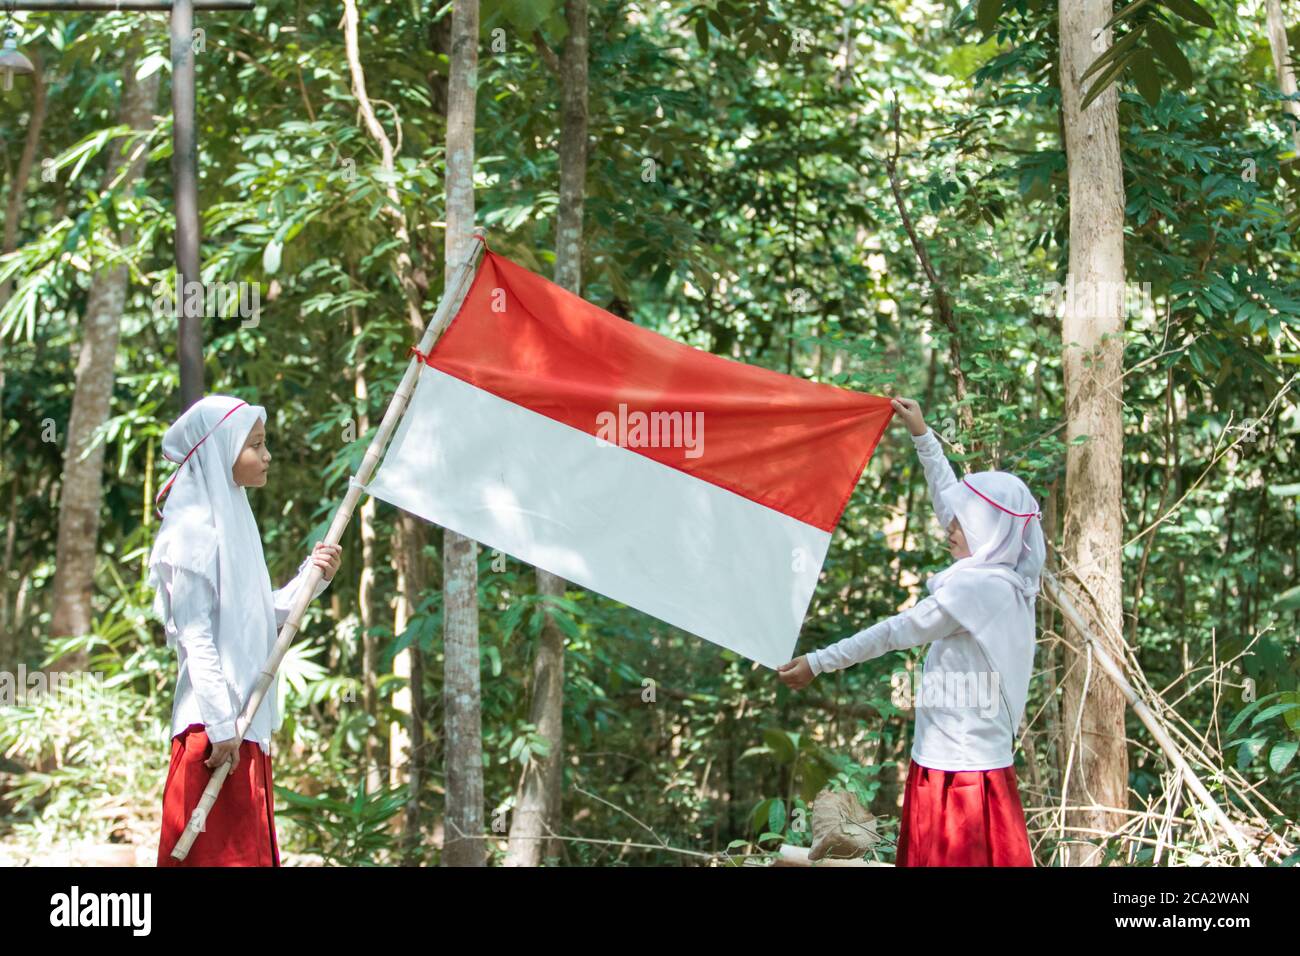 Svømmepøl triathlete forbrydelse two little Muslim girls wearing headscarves holding red and white flag and  another girl stretching a flag against a tree background Stock Photo - Alamy